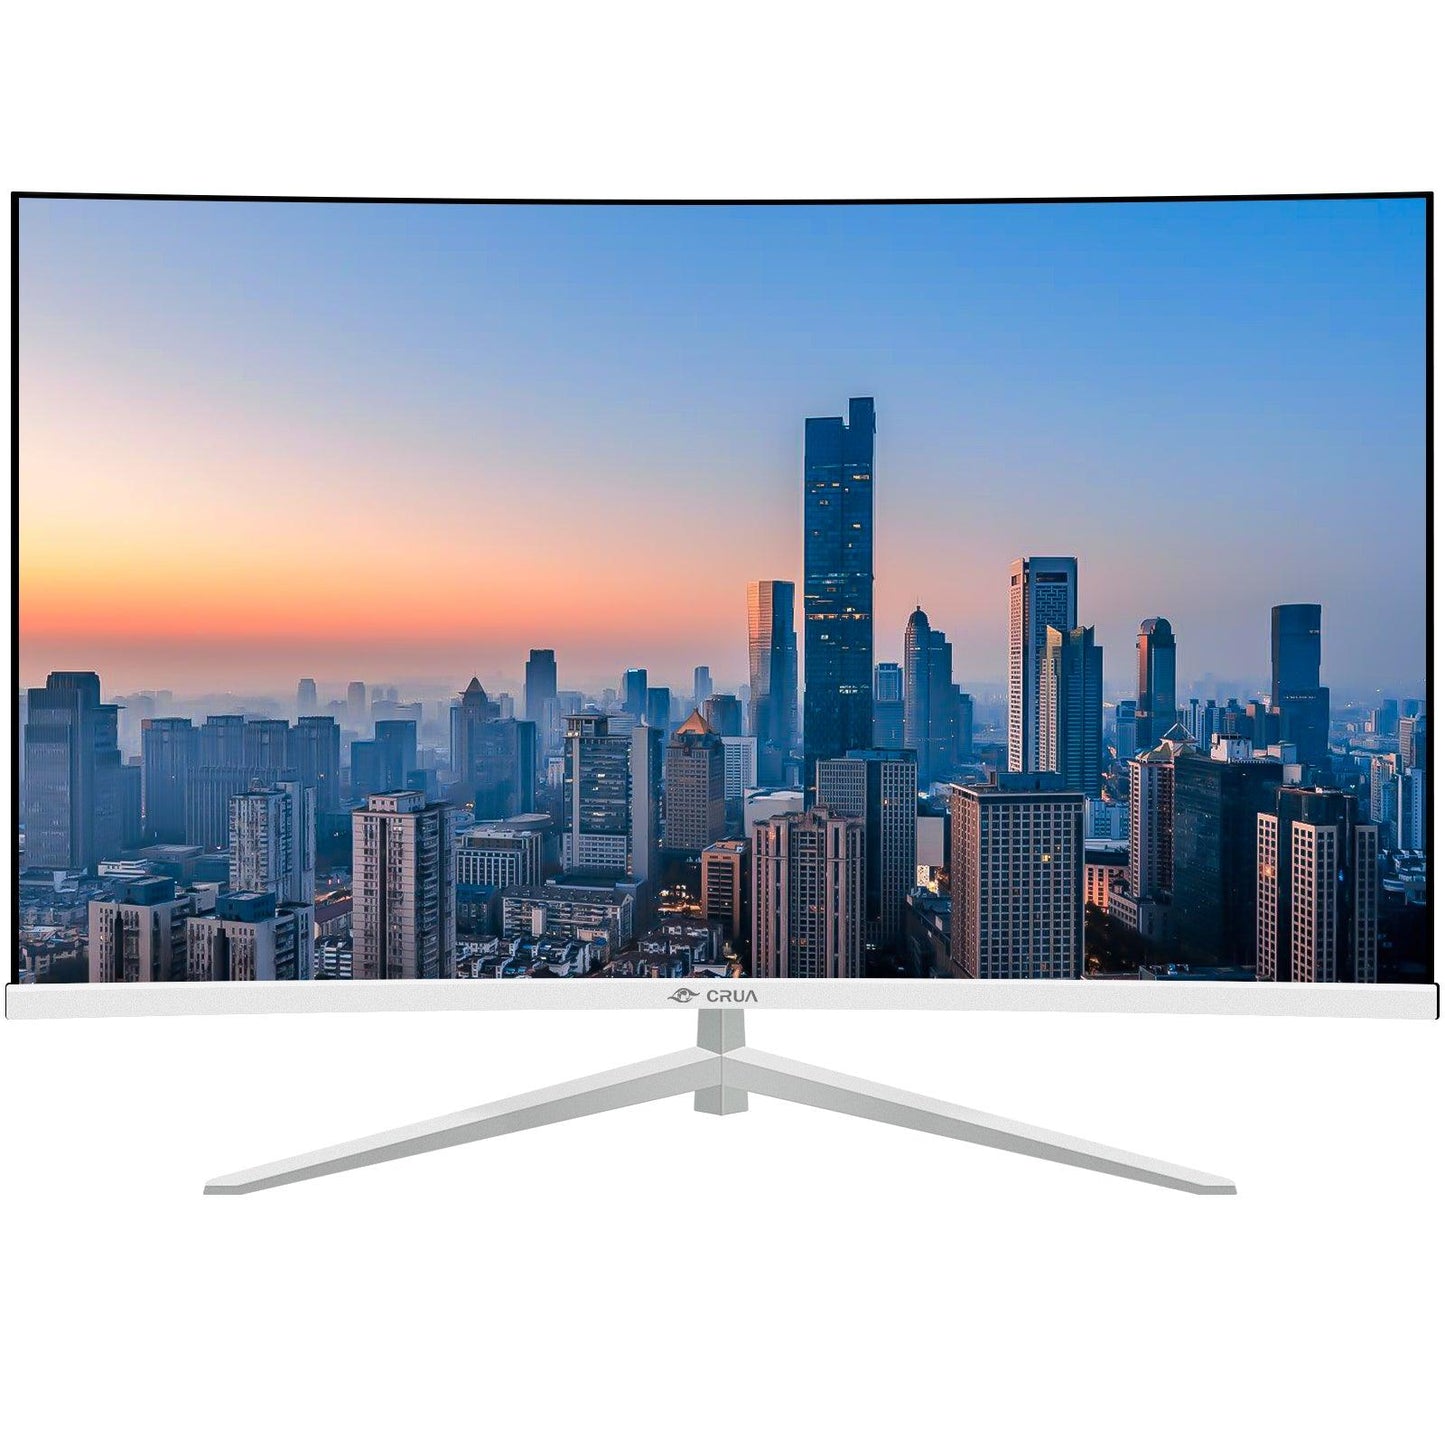 Load image into Gallery viewer, 32 Inch , FHD(1920x1080P) 75Hz BusinessComputer Monitors, 99% sRGB Curved Monitor - CRUA-Monitor
